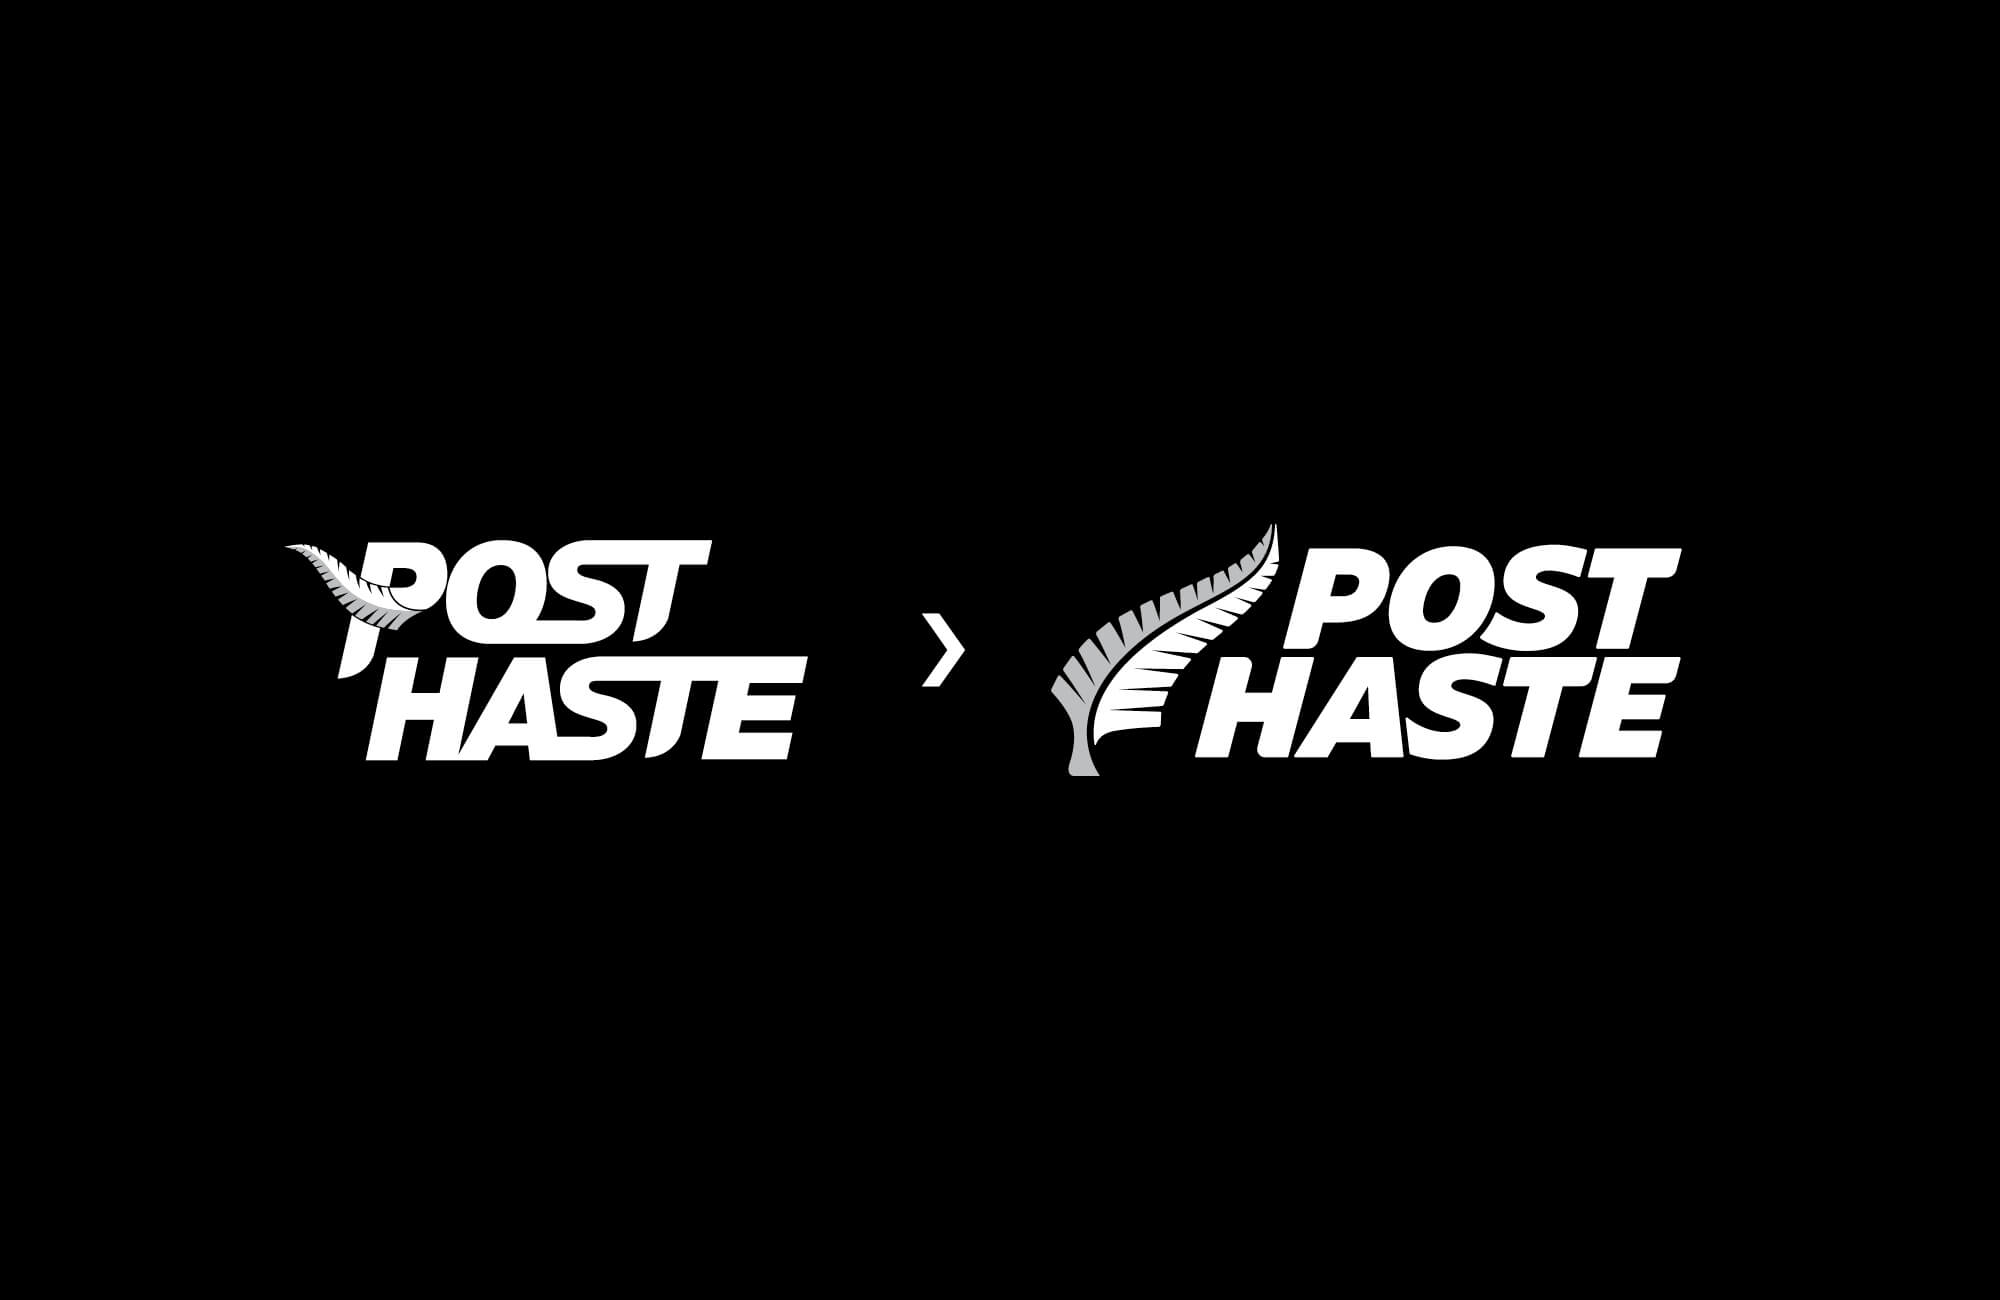 post haste meaning